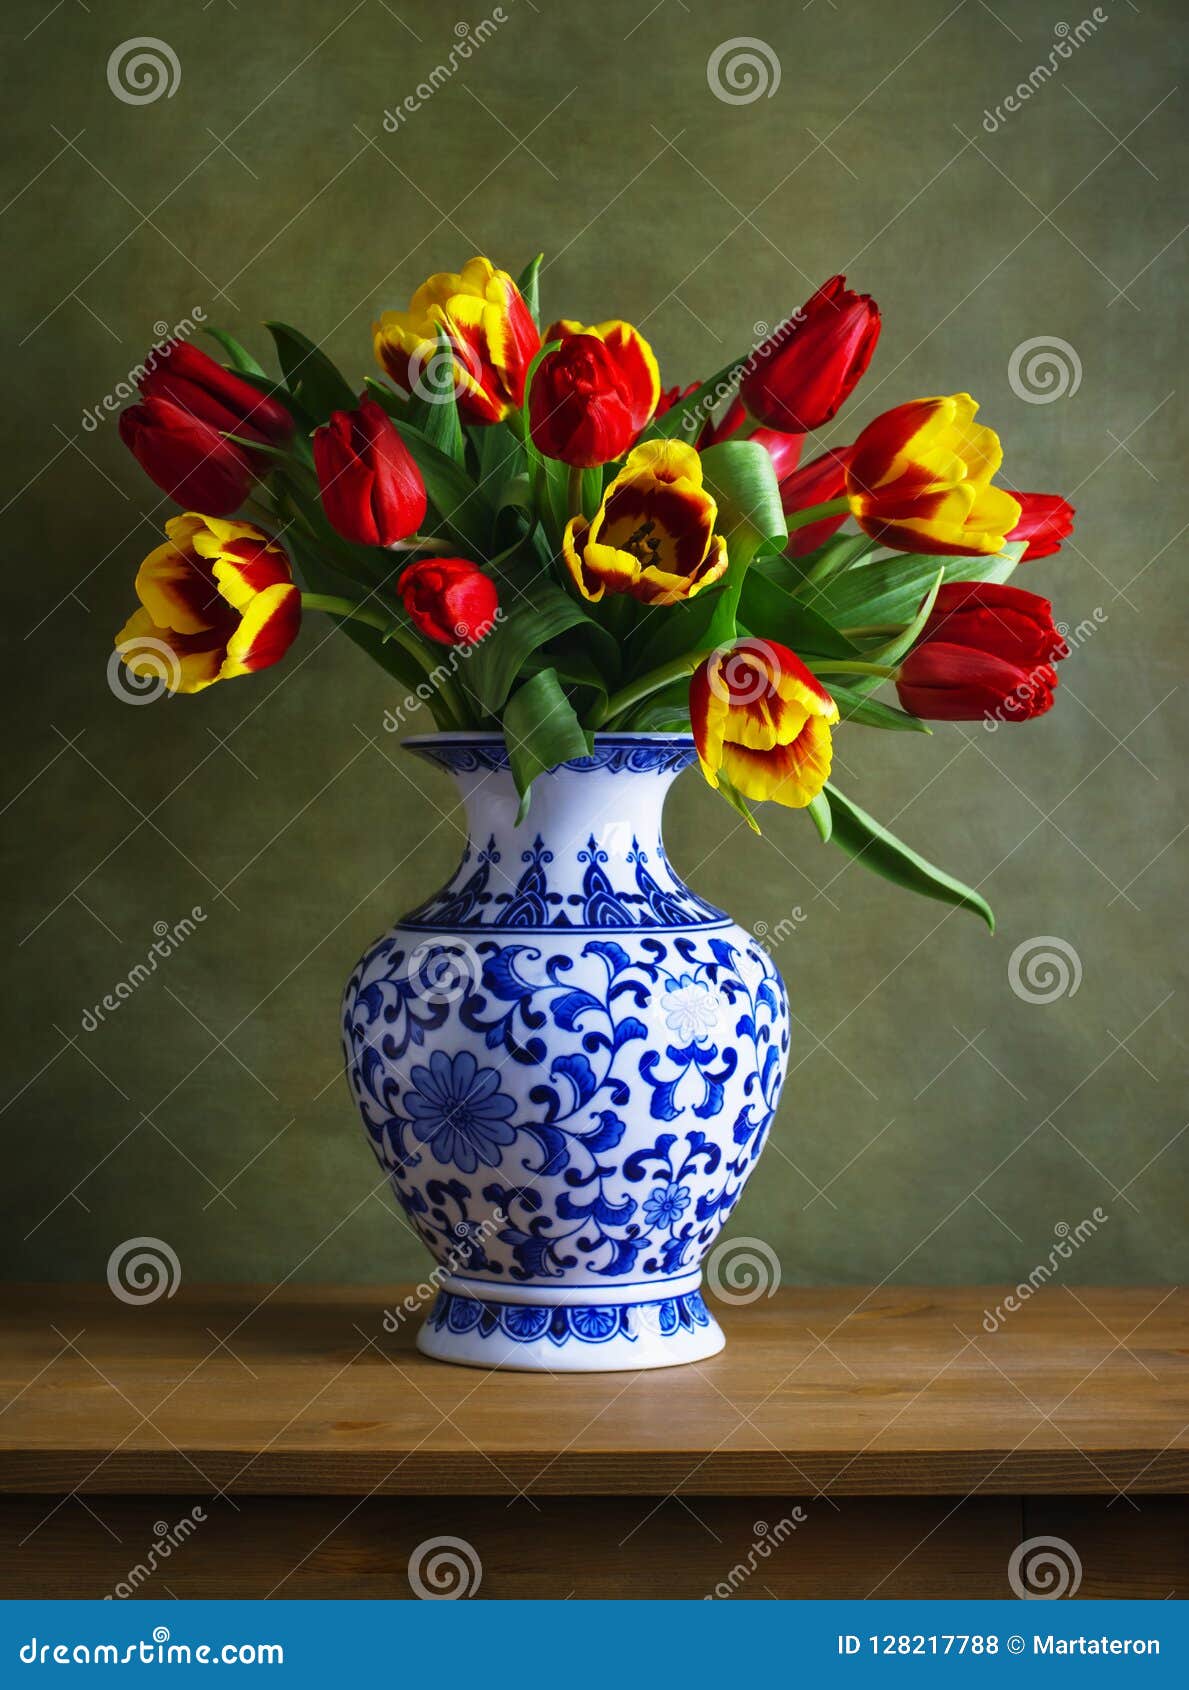 Still Life with Colorful Tulips Stock Photo - Image of tulips ...